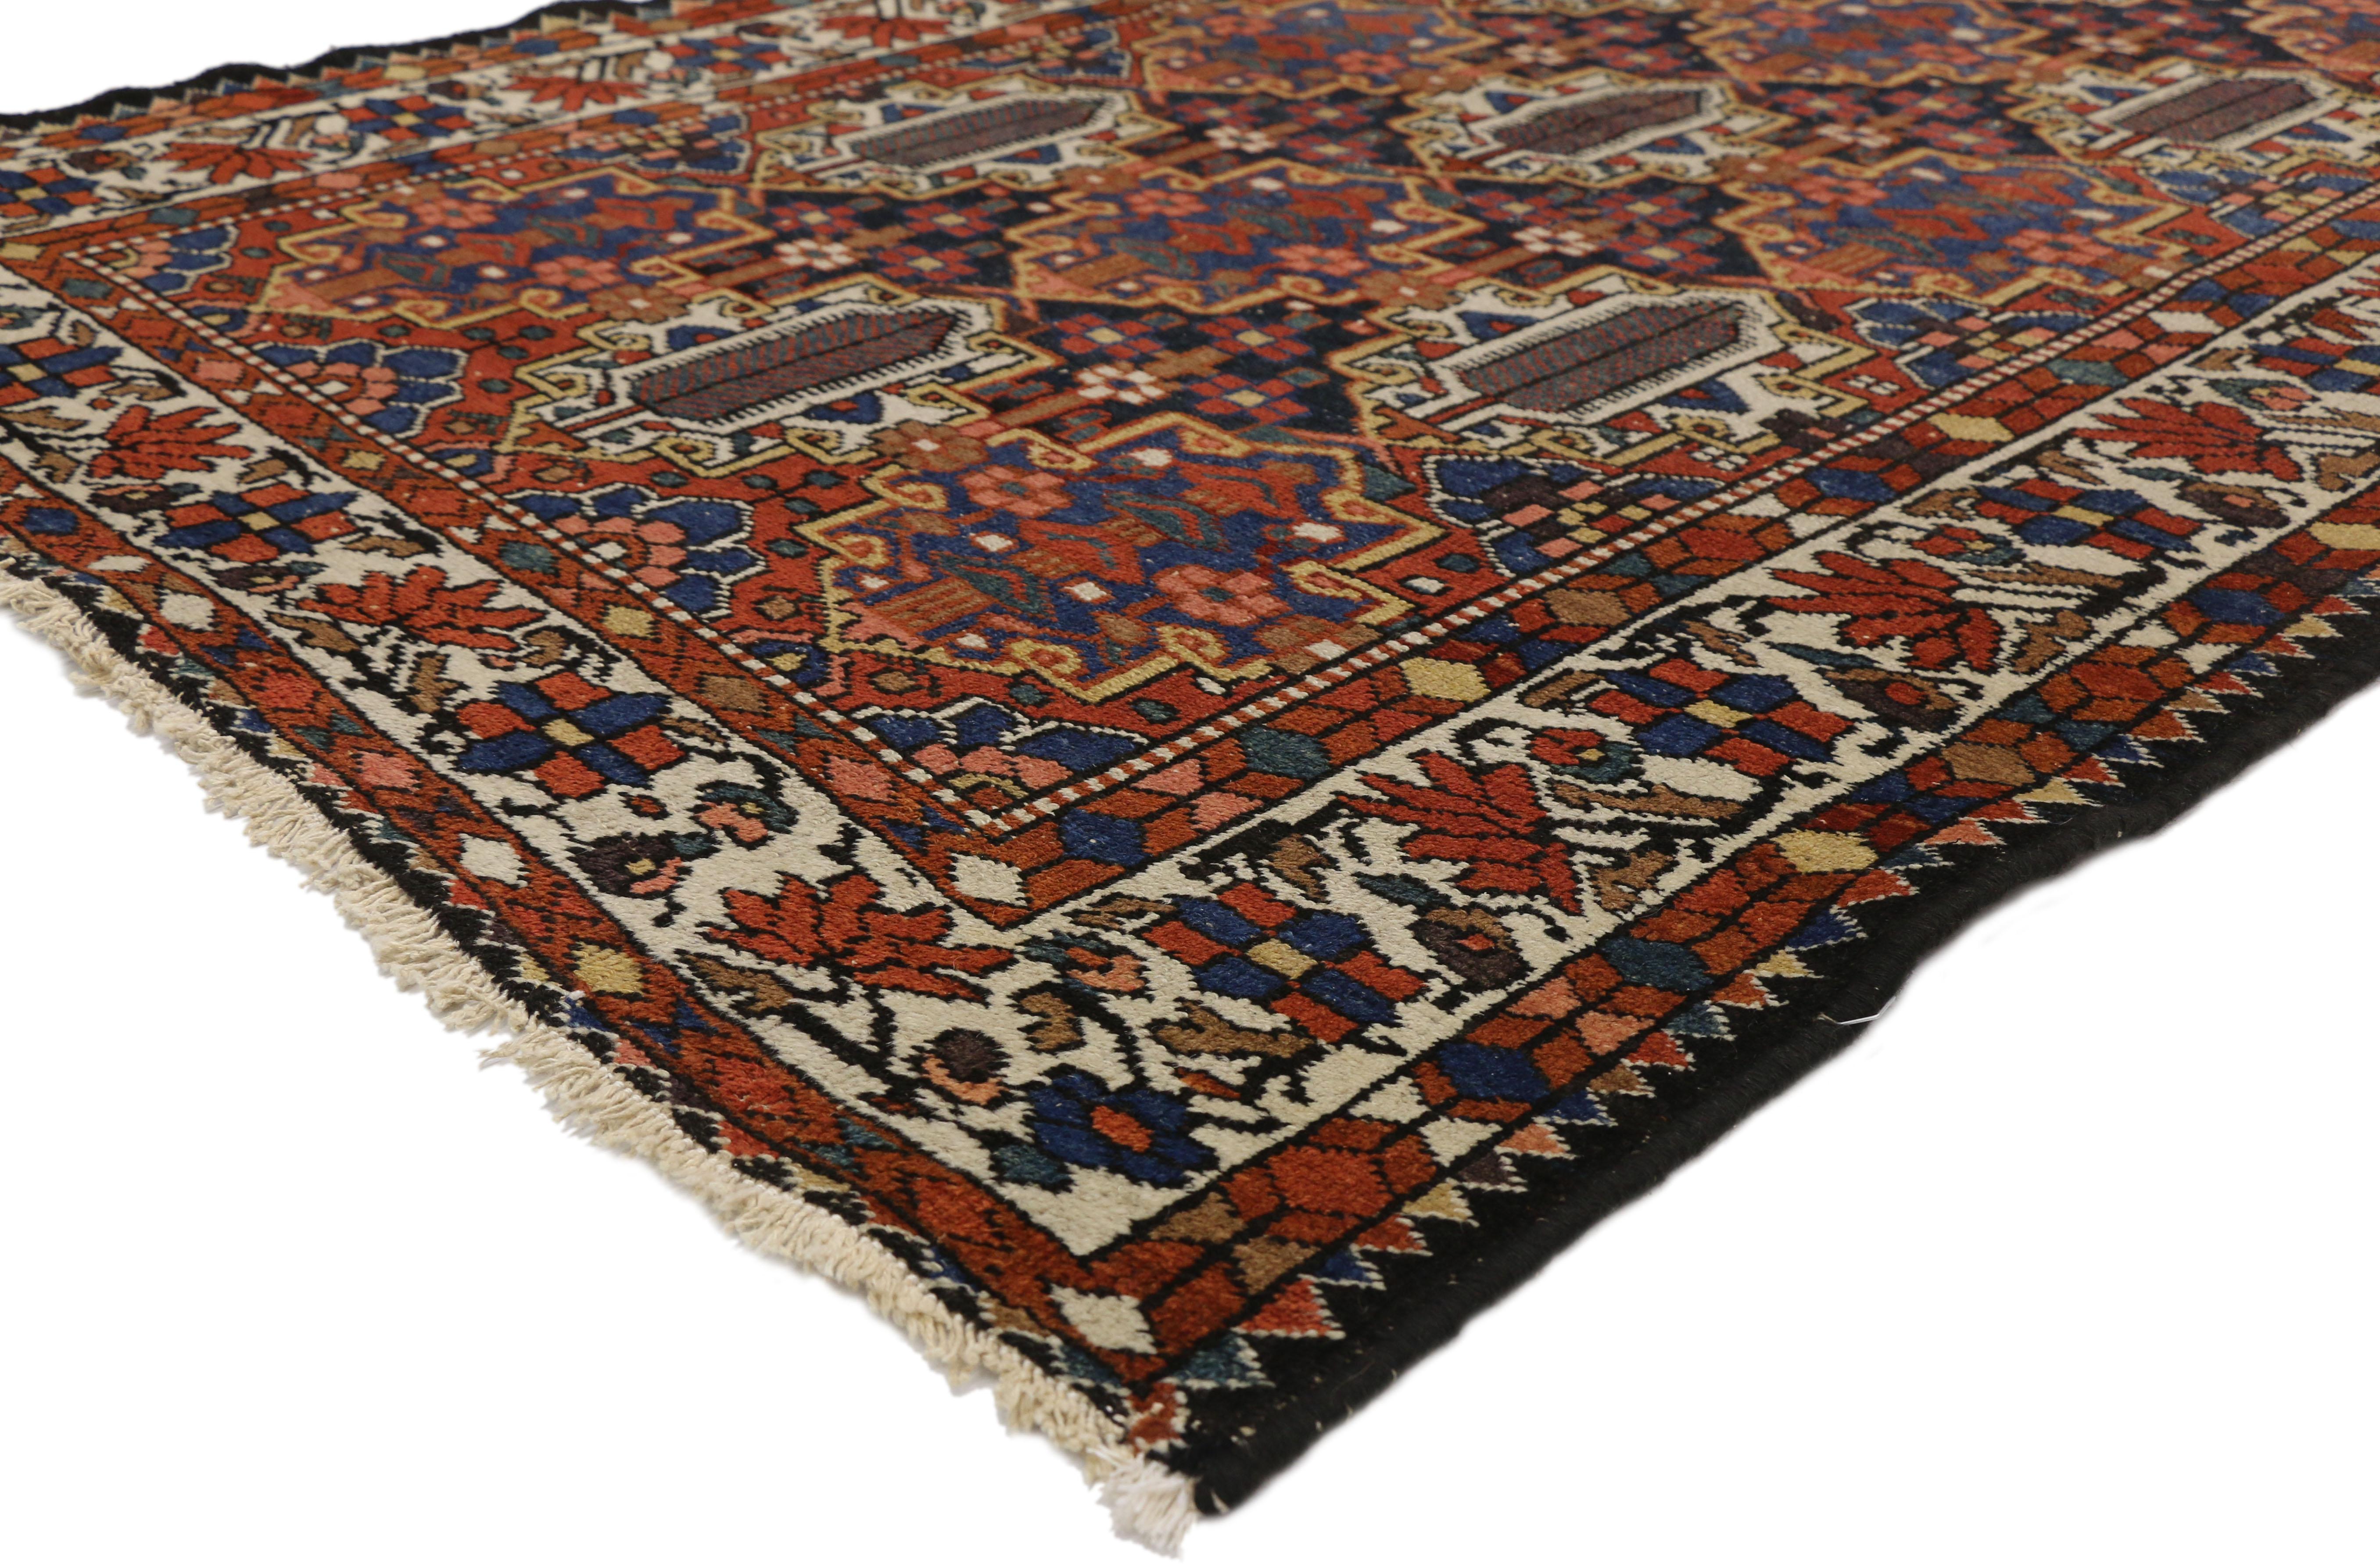 73283, antique Persian Bakhtiari rug with Federal American Colonial style. With a timeless botanical pattern and naturalistic design elements, this hand knotted wool antique Persian Bakhtiari rug will take on a curated lived-in look that feels